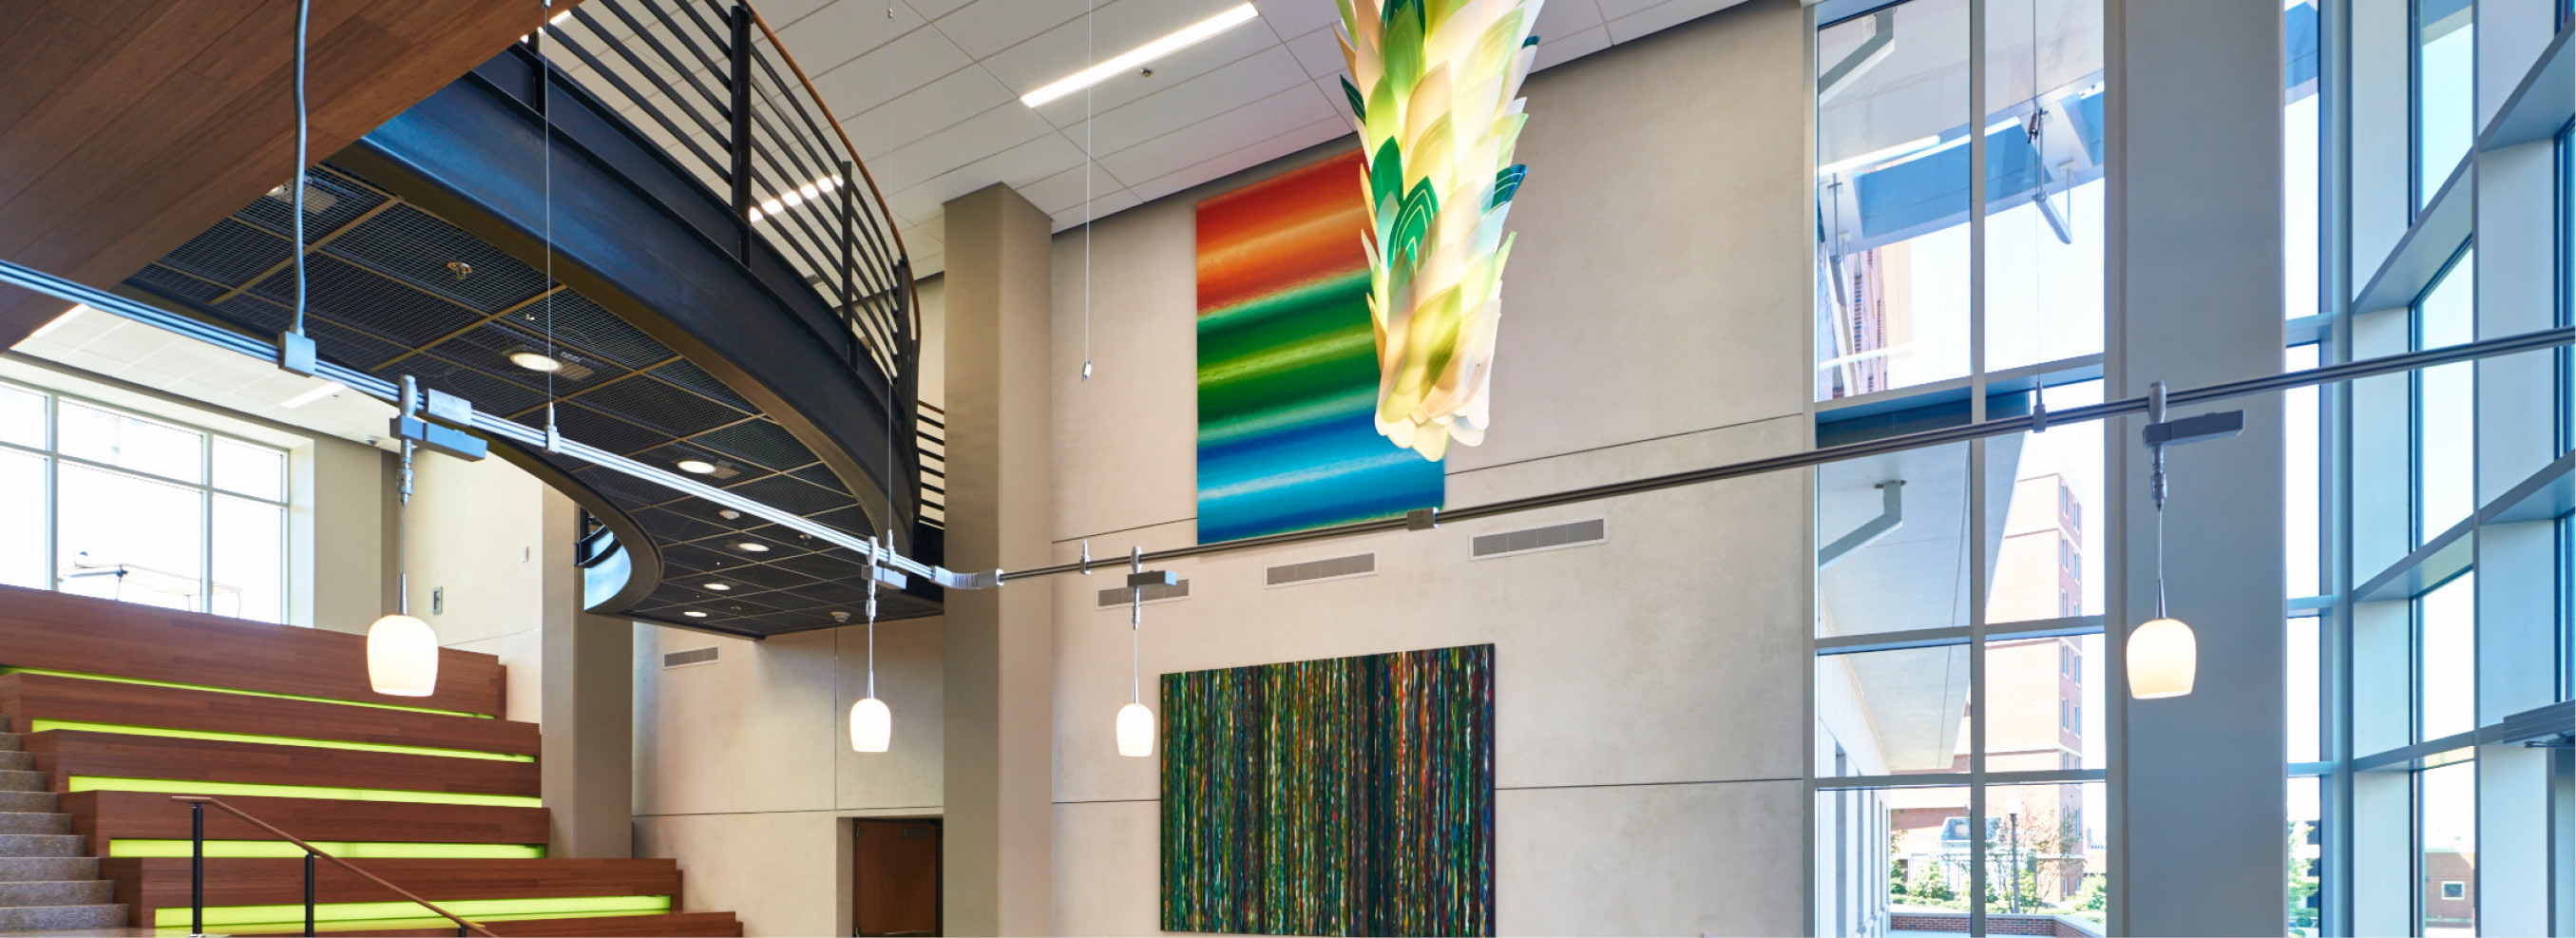 UAB Residence Hall Lobby Feature Image